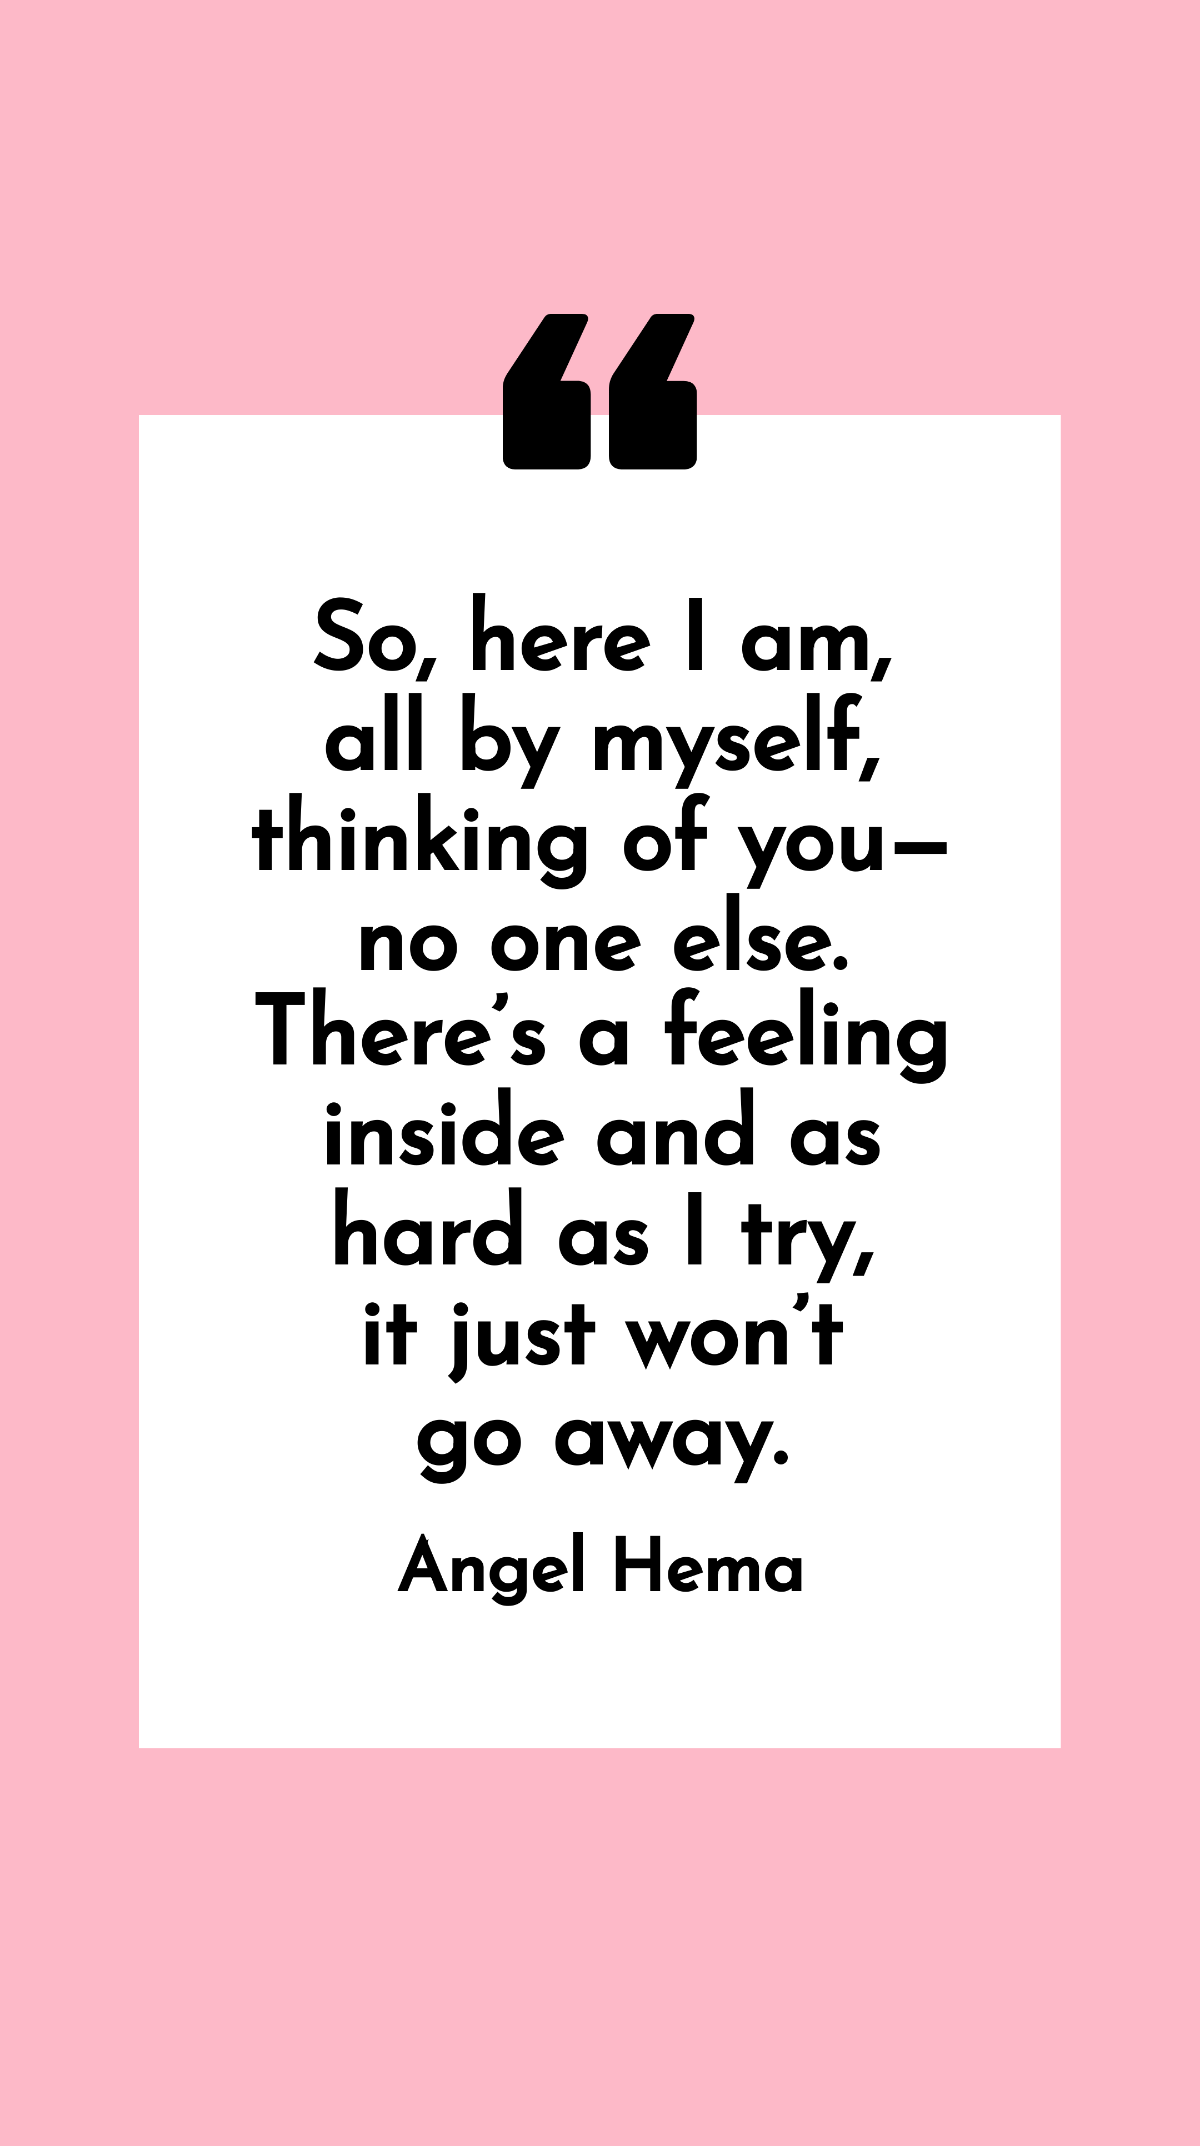 Free Angel Hema - So, here I am, all by myself, thinking of you – no one else. There’s a feeling inside and as hard as I try, it just won’t go away. Template